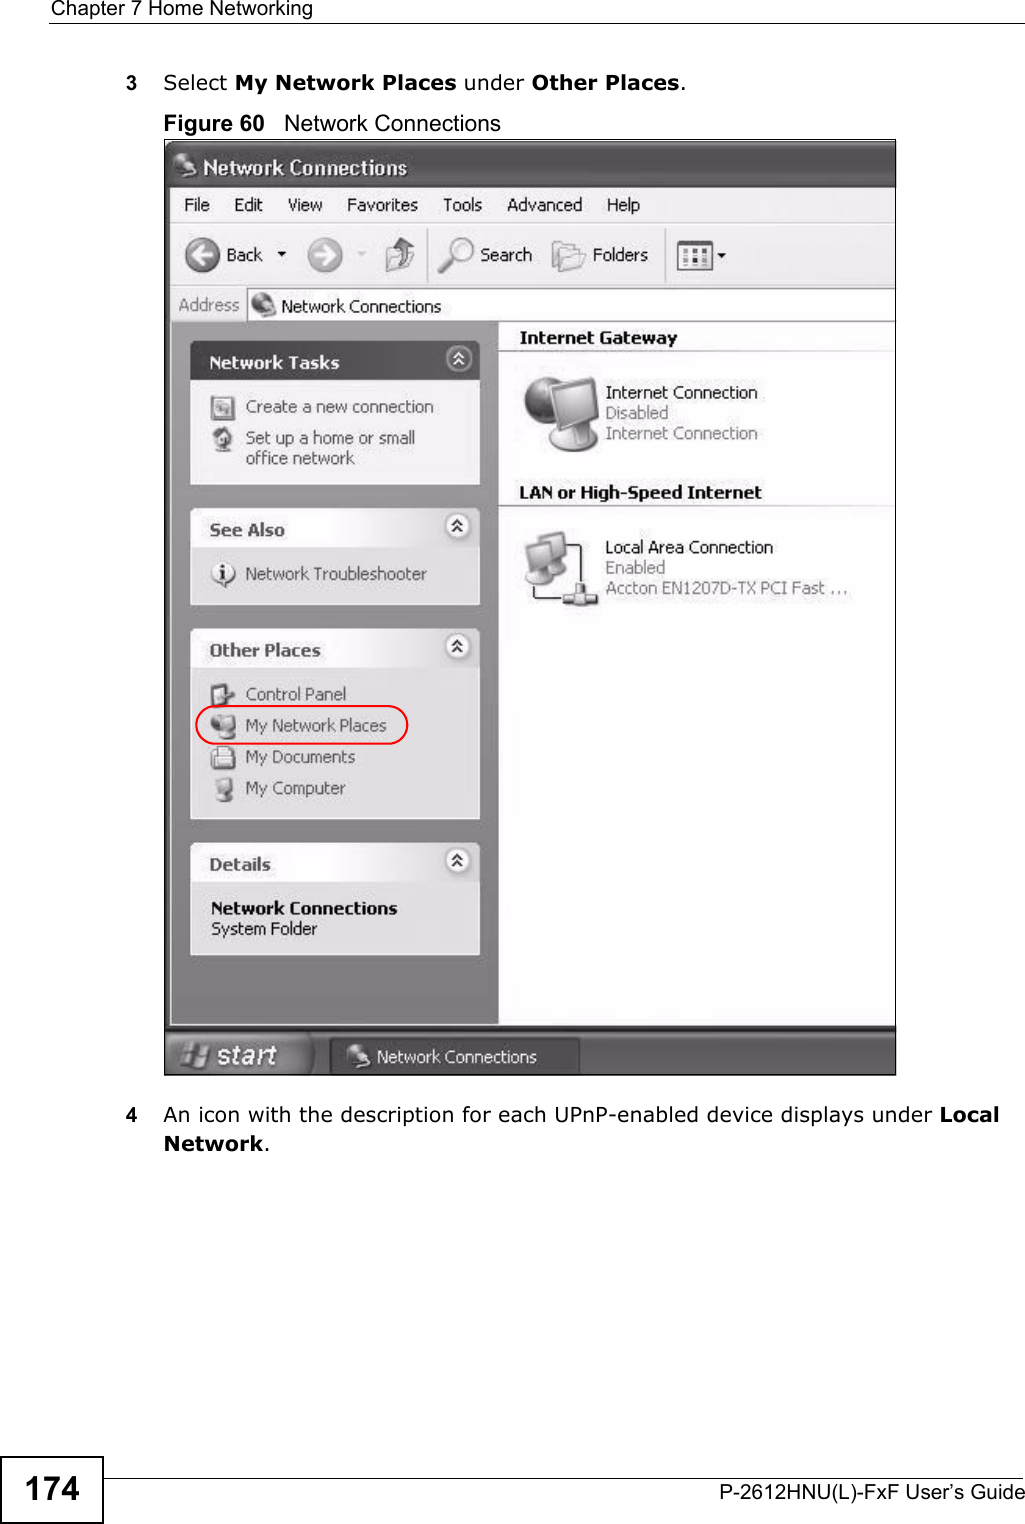 Chapter 7 Home NetworkingP-2612HNU(L)-FxF User’s Guide1743Select My Network Places under Other Places. Figure 60   Network Connections4An icon with the description for each UPnP-enabled device displays under Local Network. 